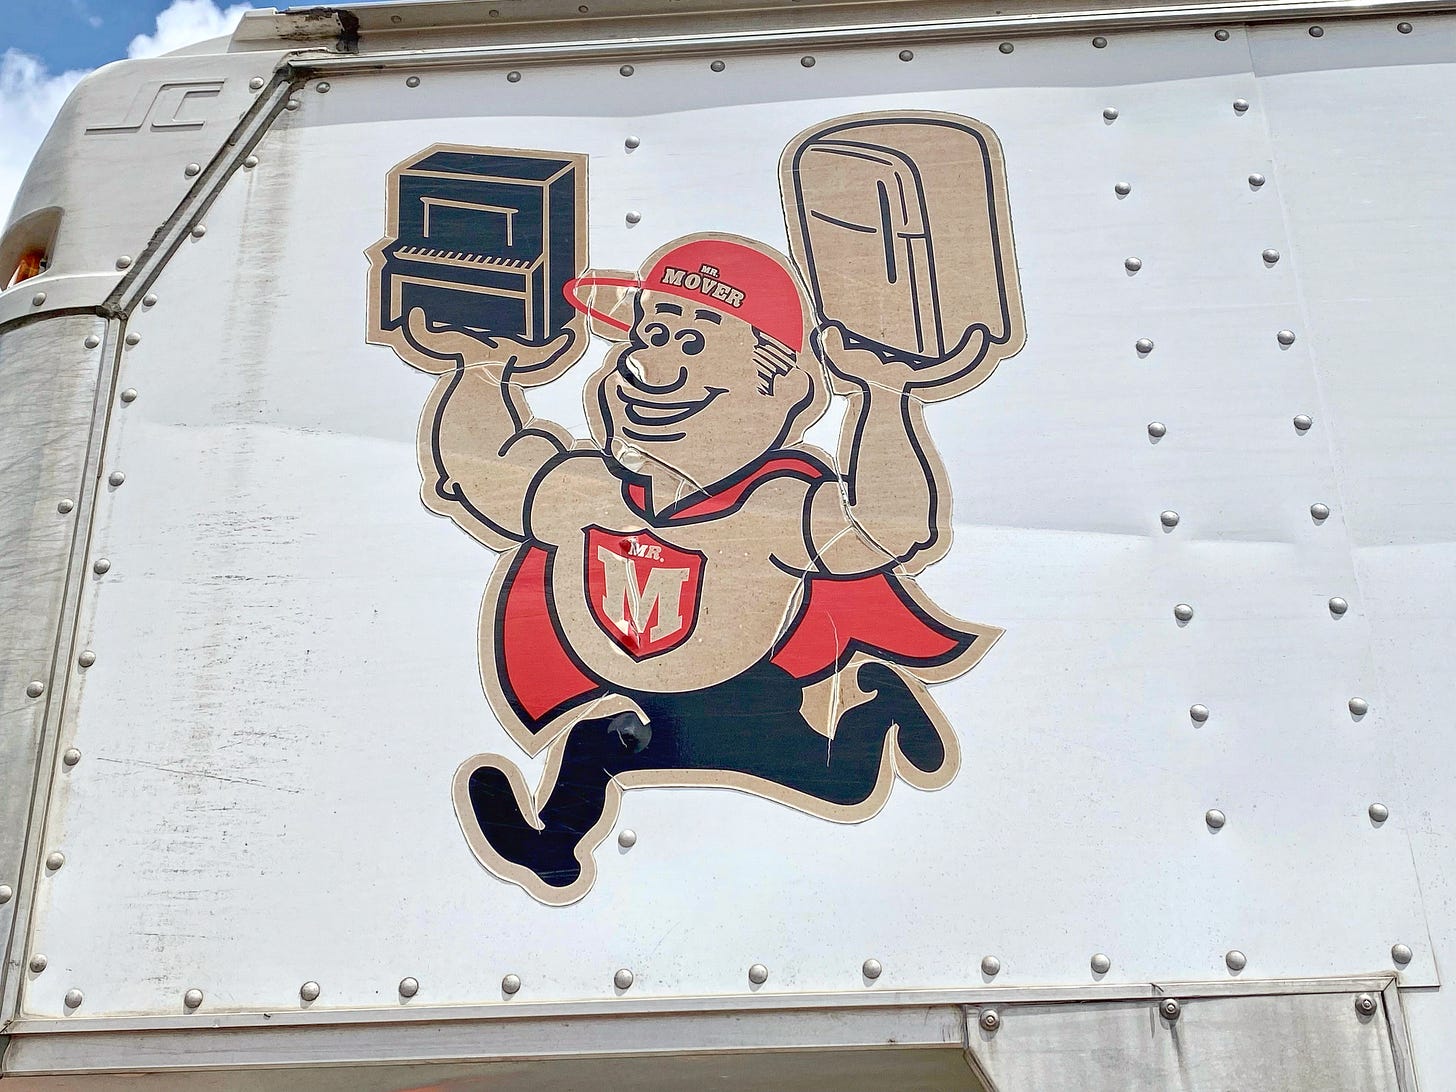 Moving truck for Mr. Mover. Logo is a cape-wearing moving man with an M on his chest, carrying a piano in one hand a refri